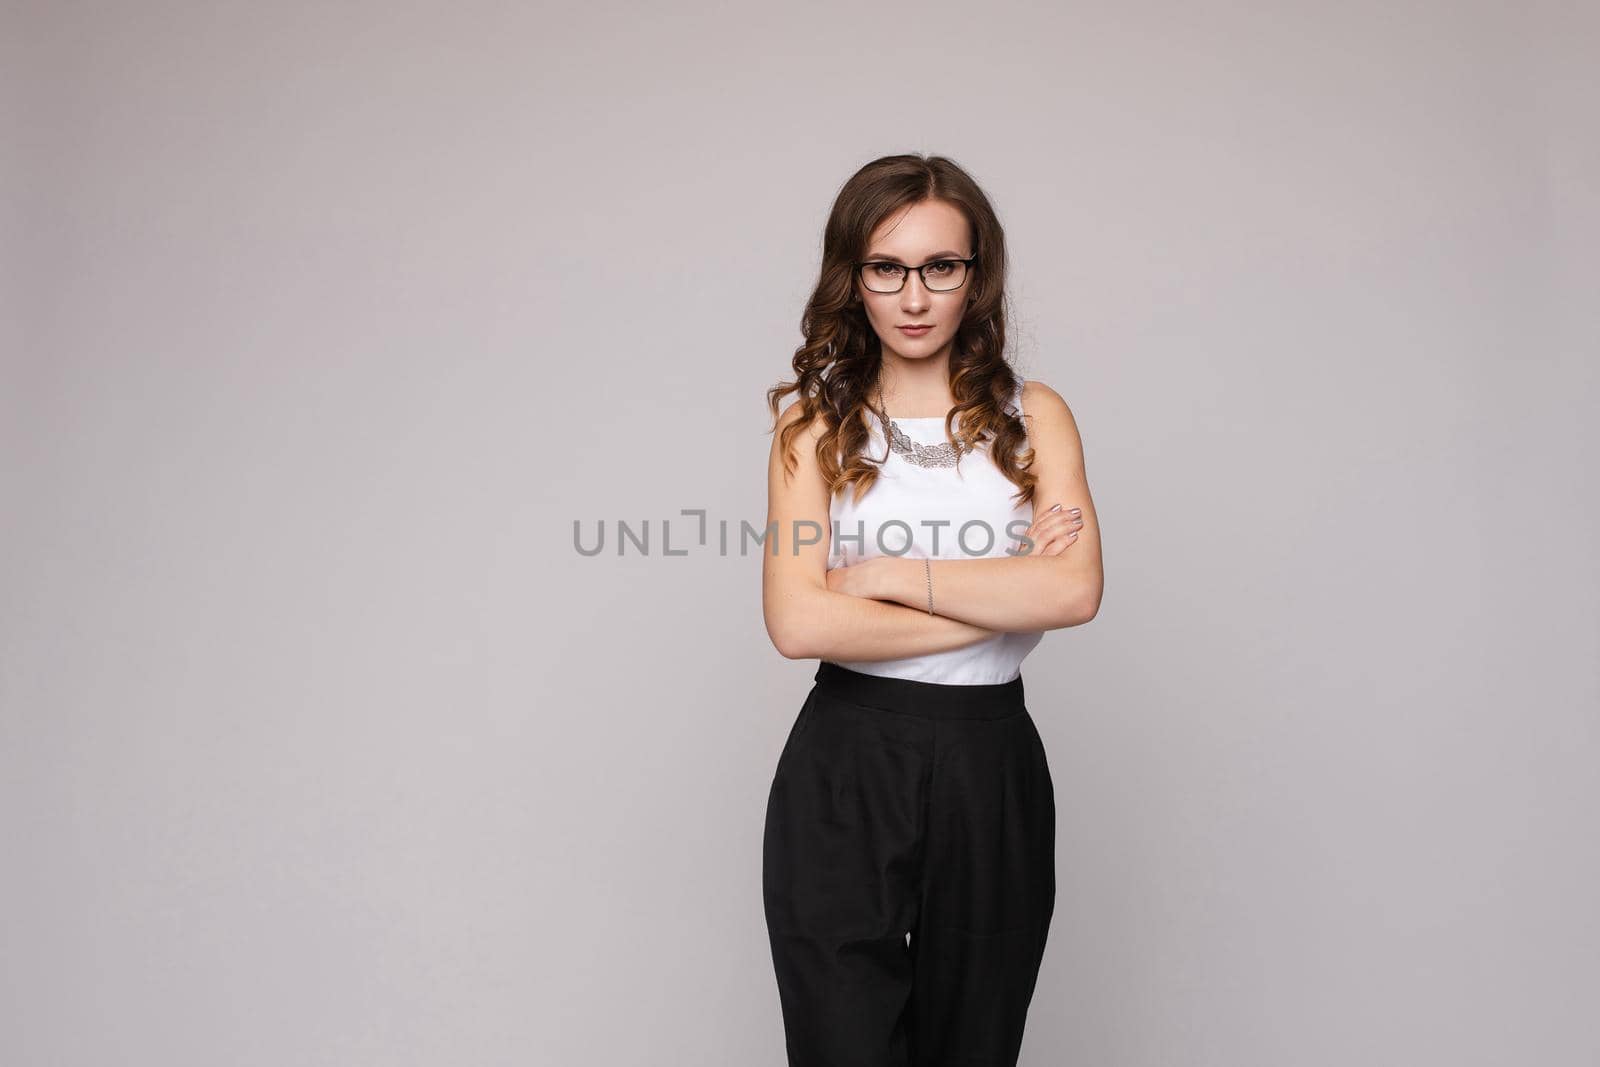 Front view of shocked long haired woman keeping glasses and looking with big eyes in camera. Young female in white shirt standing and posing on grey isolated background. Concept of surprise.